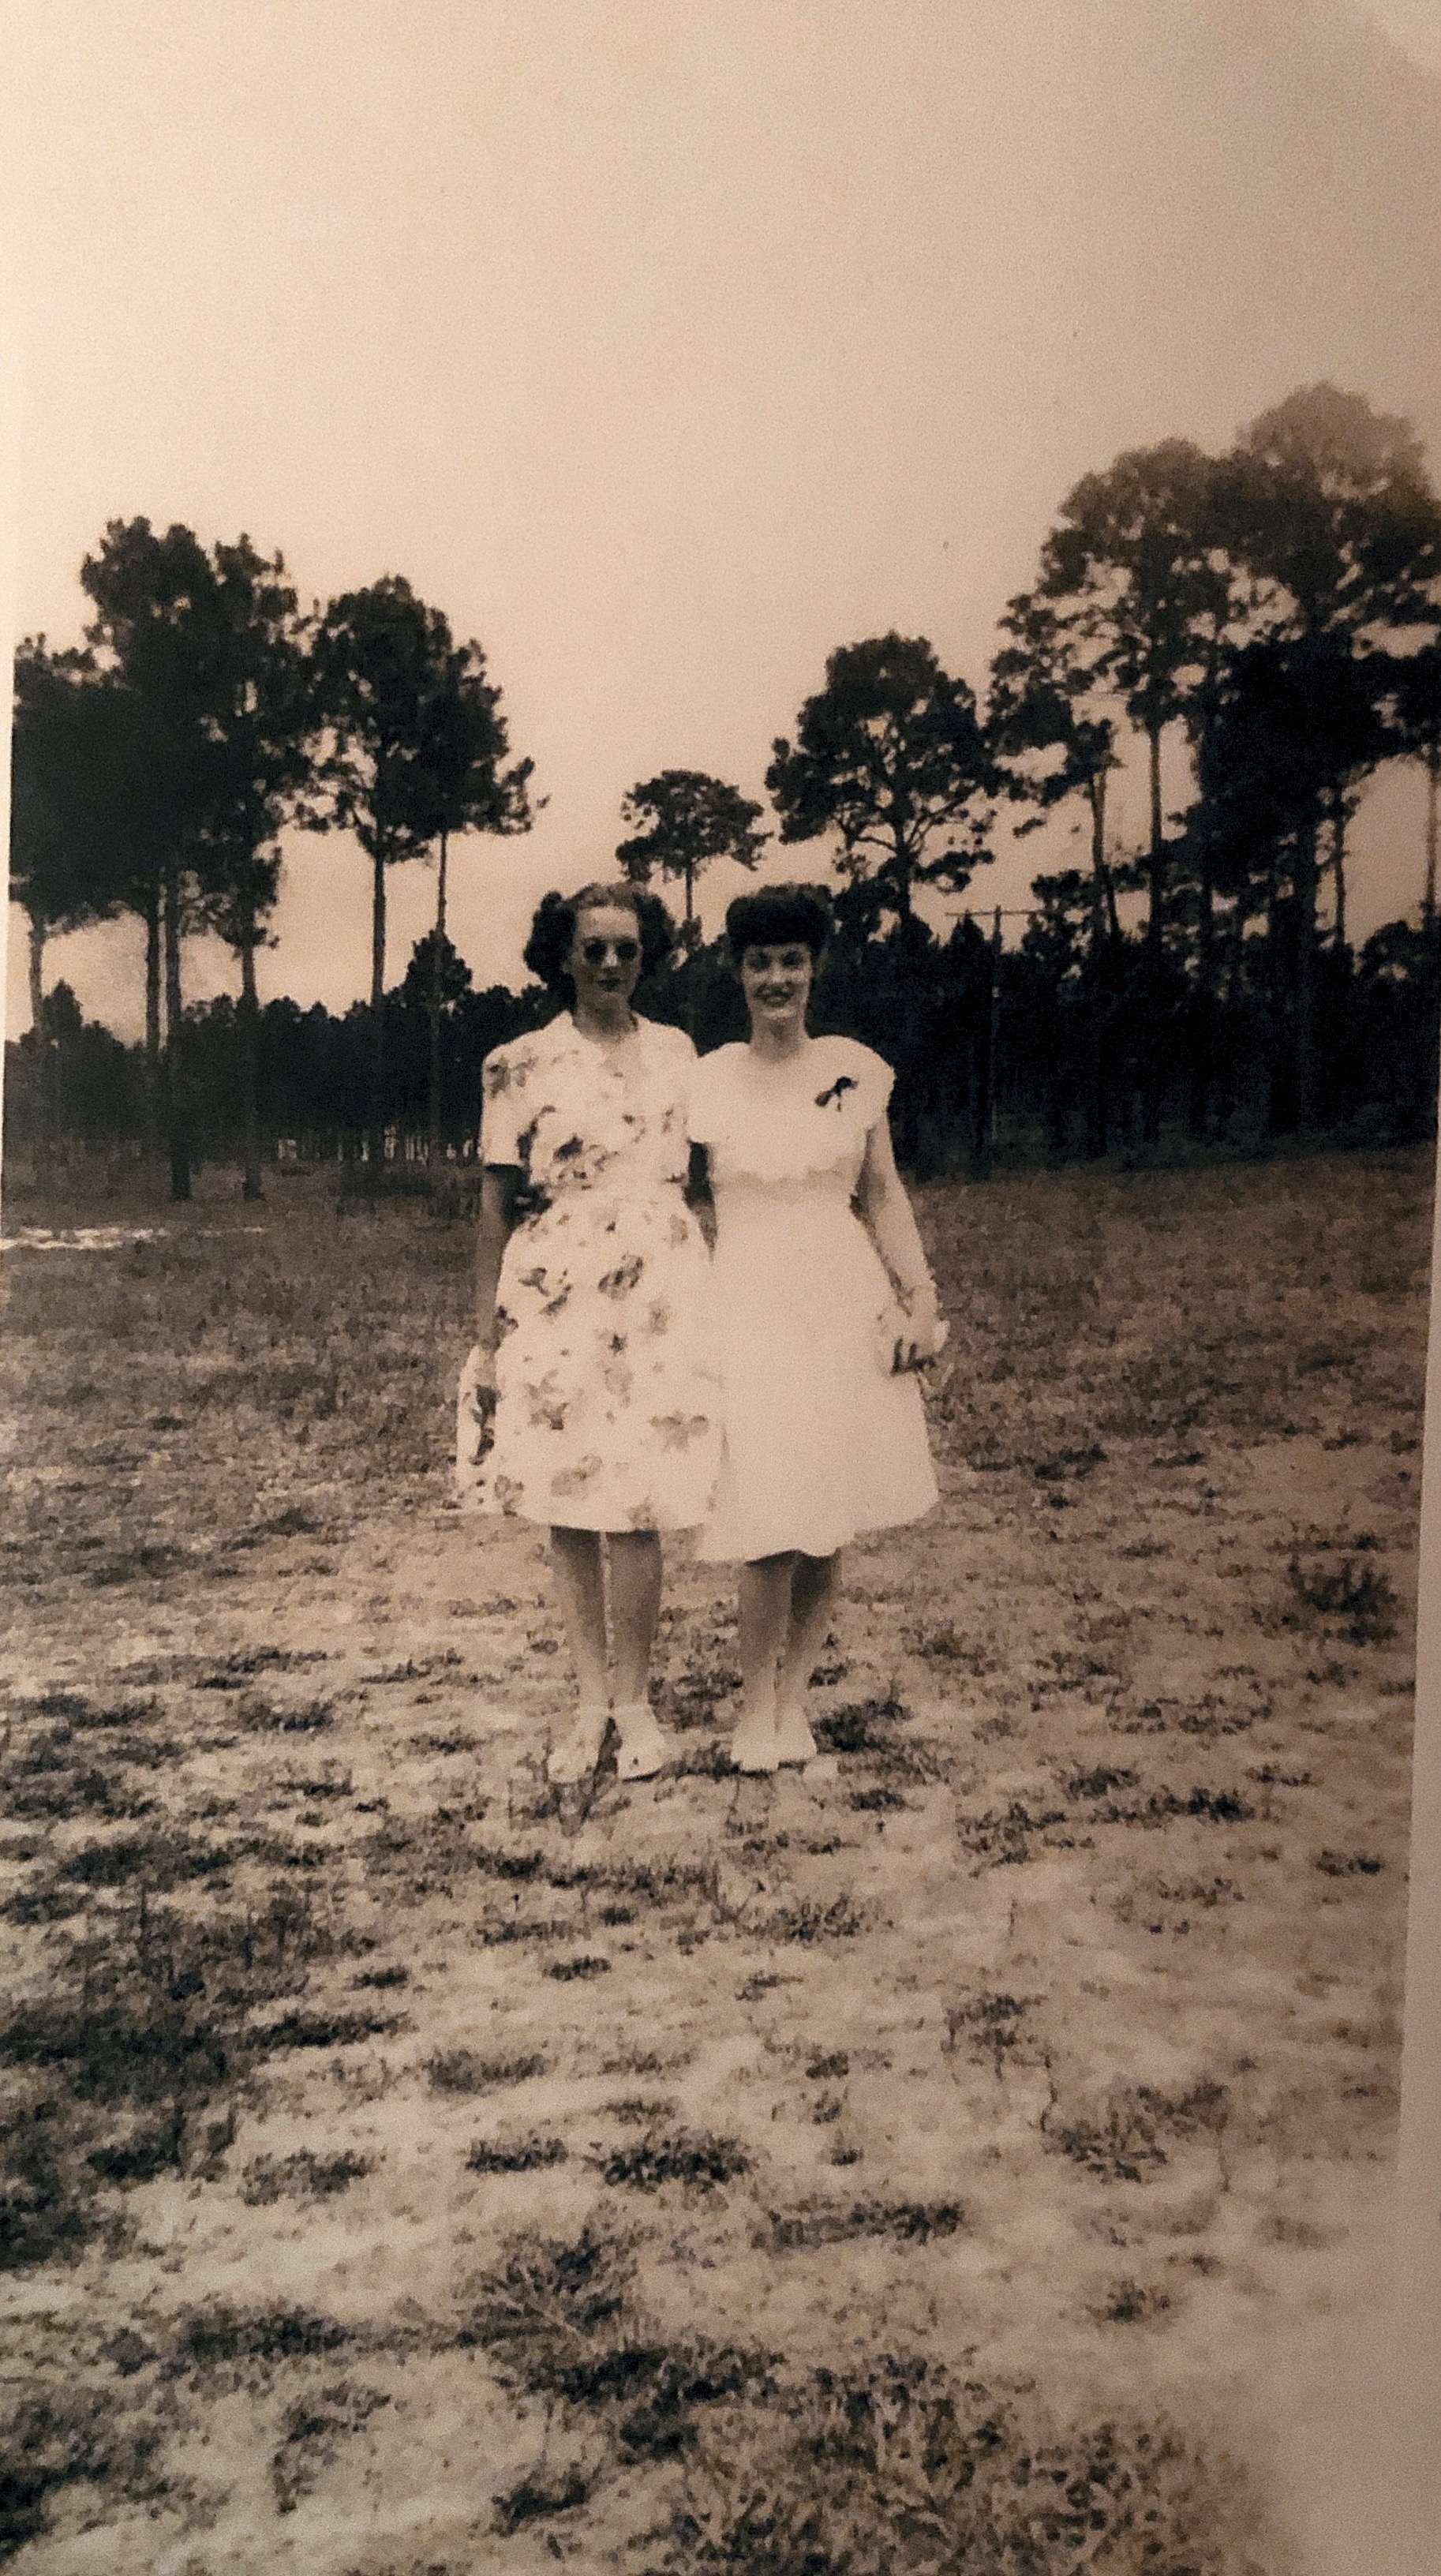 Sisters, Rita & Bea DiFranco at the Edgewater Gulf Hotel in Biloxi Mississippi. Bea and Tony invited Rita and Frank to help them celebrate their honeymoon! It’s July 1946.